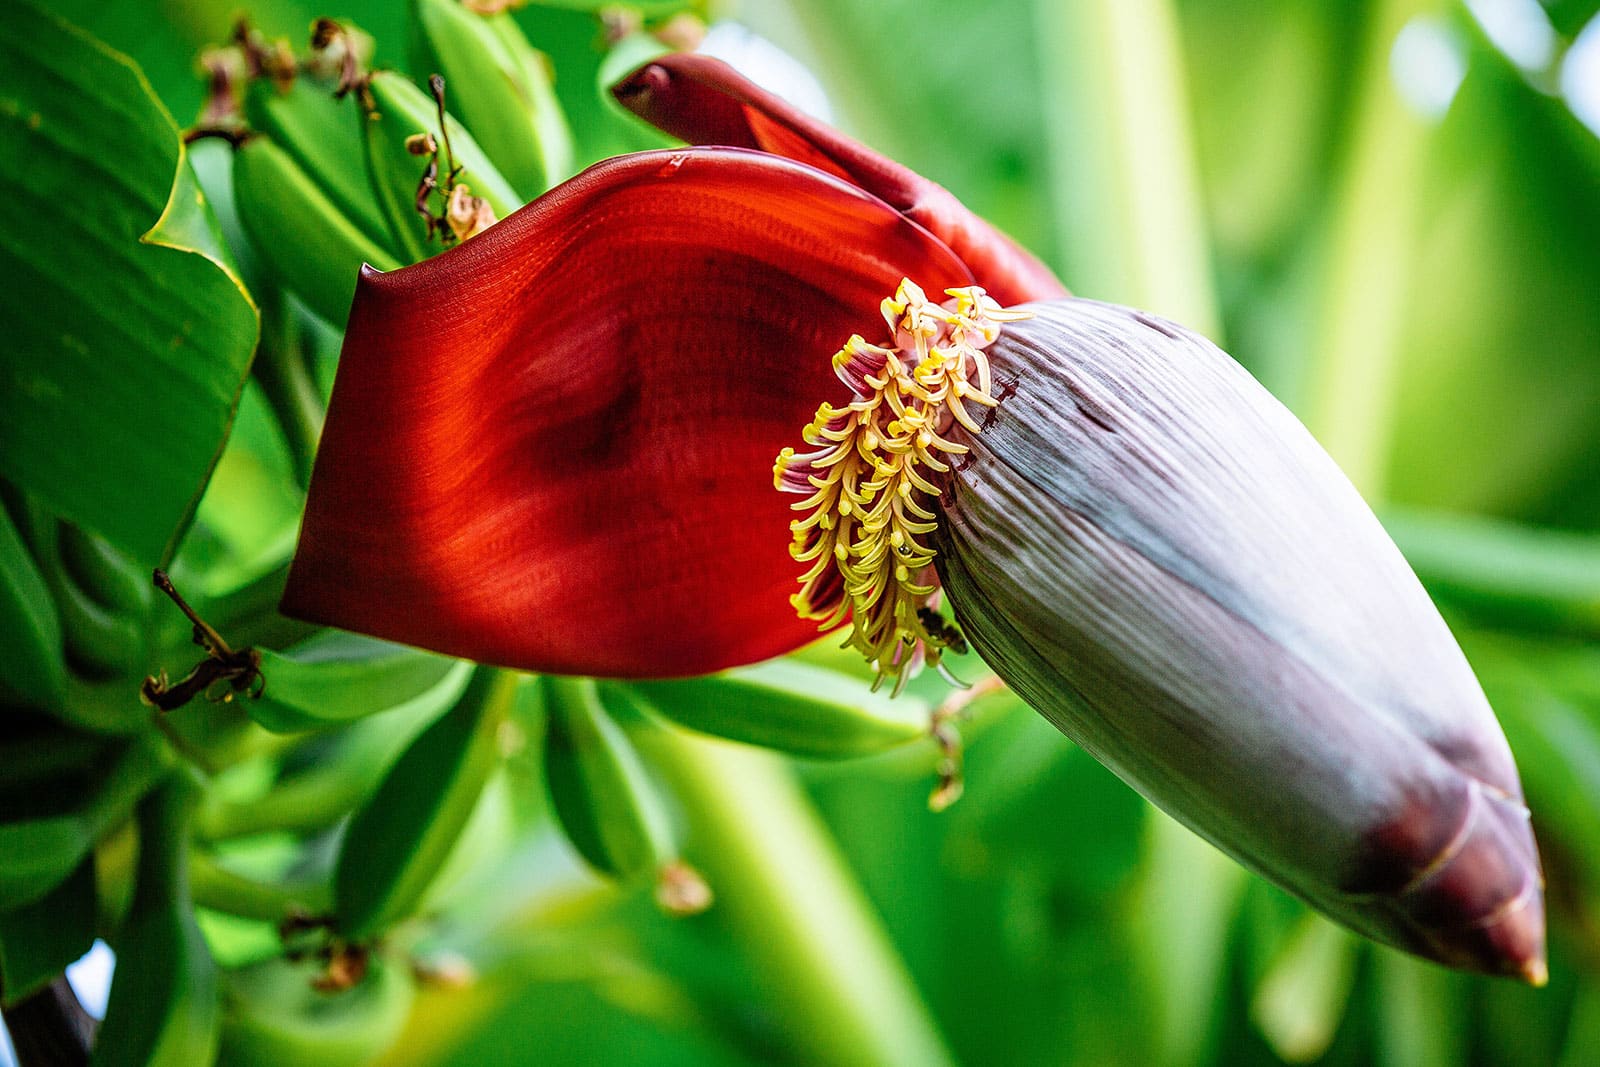 Banana Flowers, An Unexpected Superfood: What They Are and How to